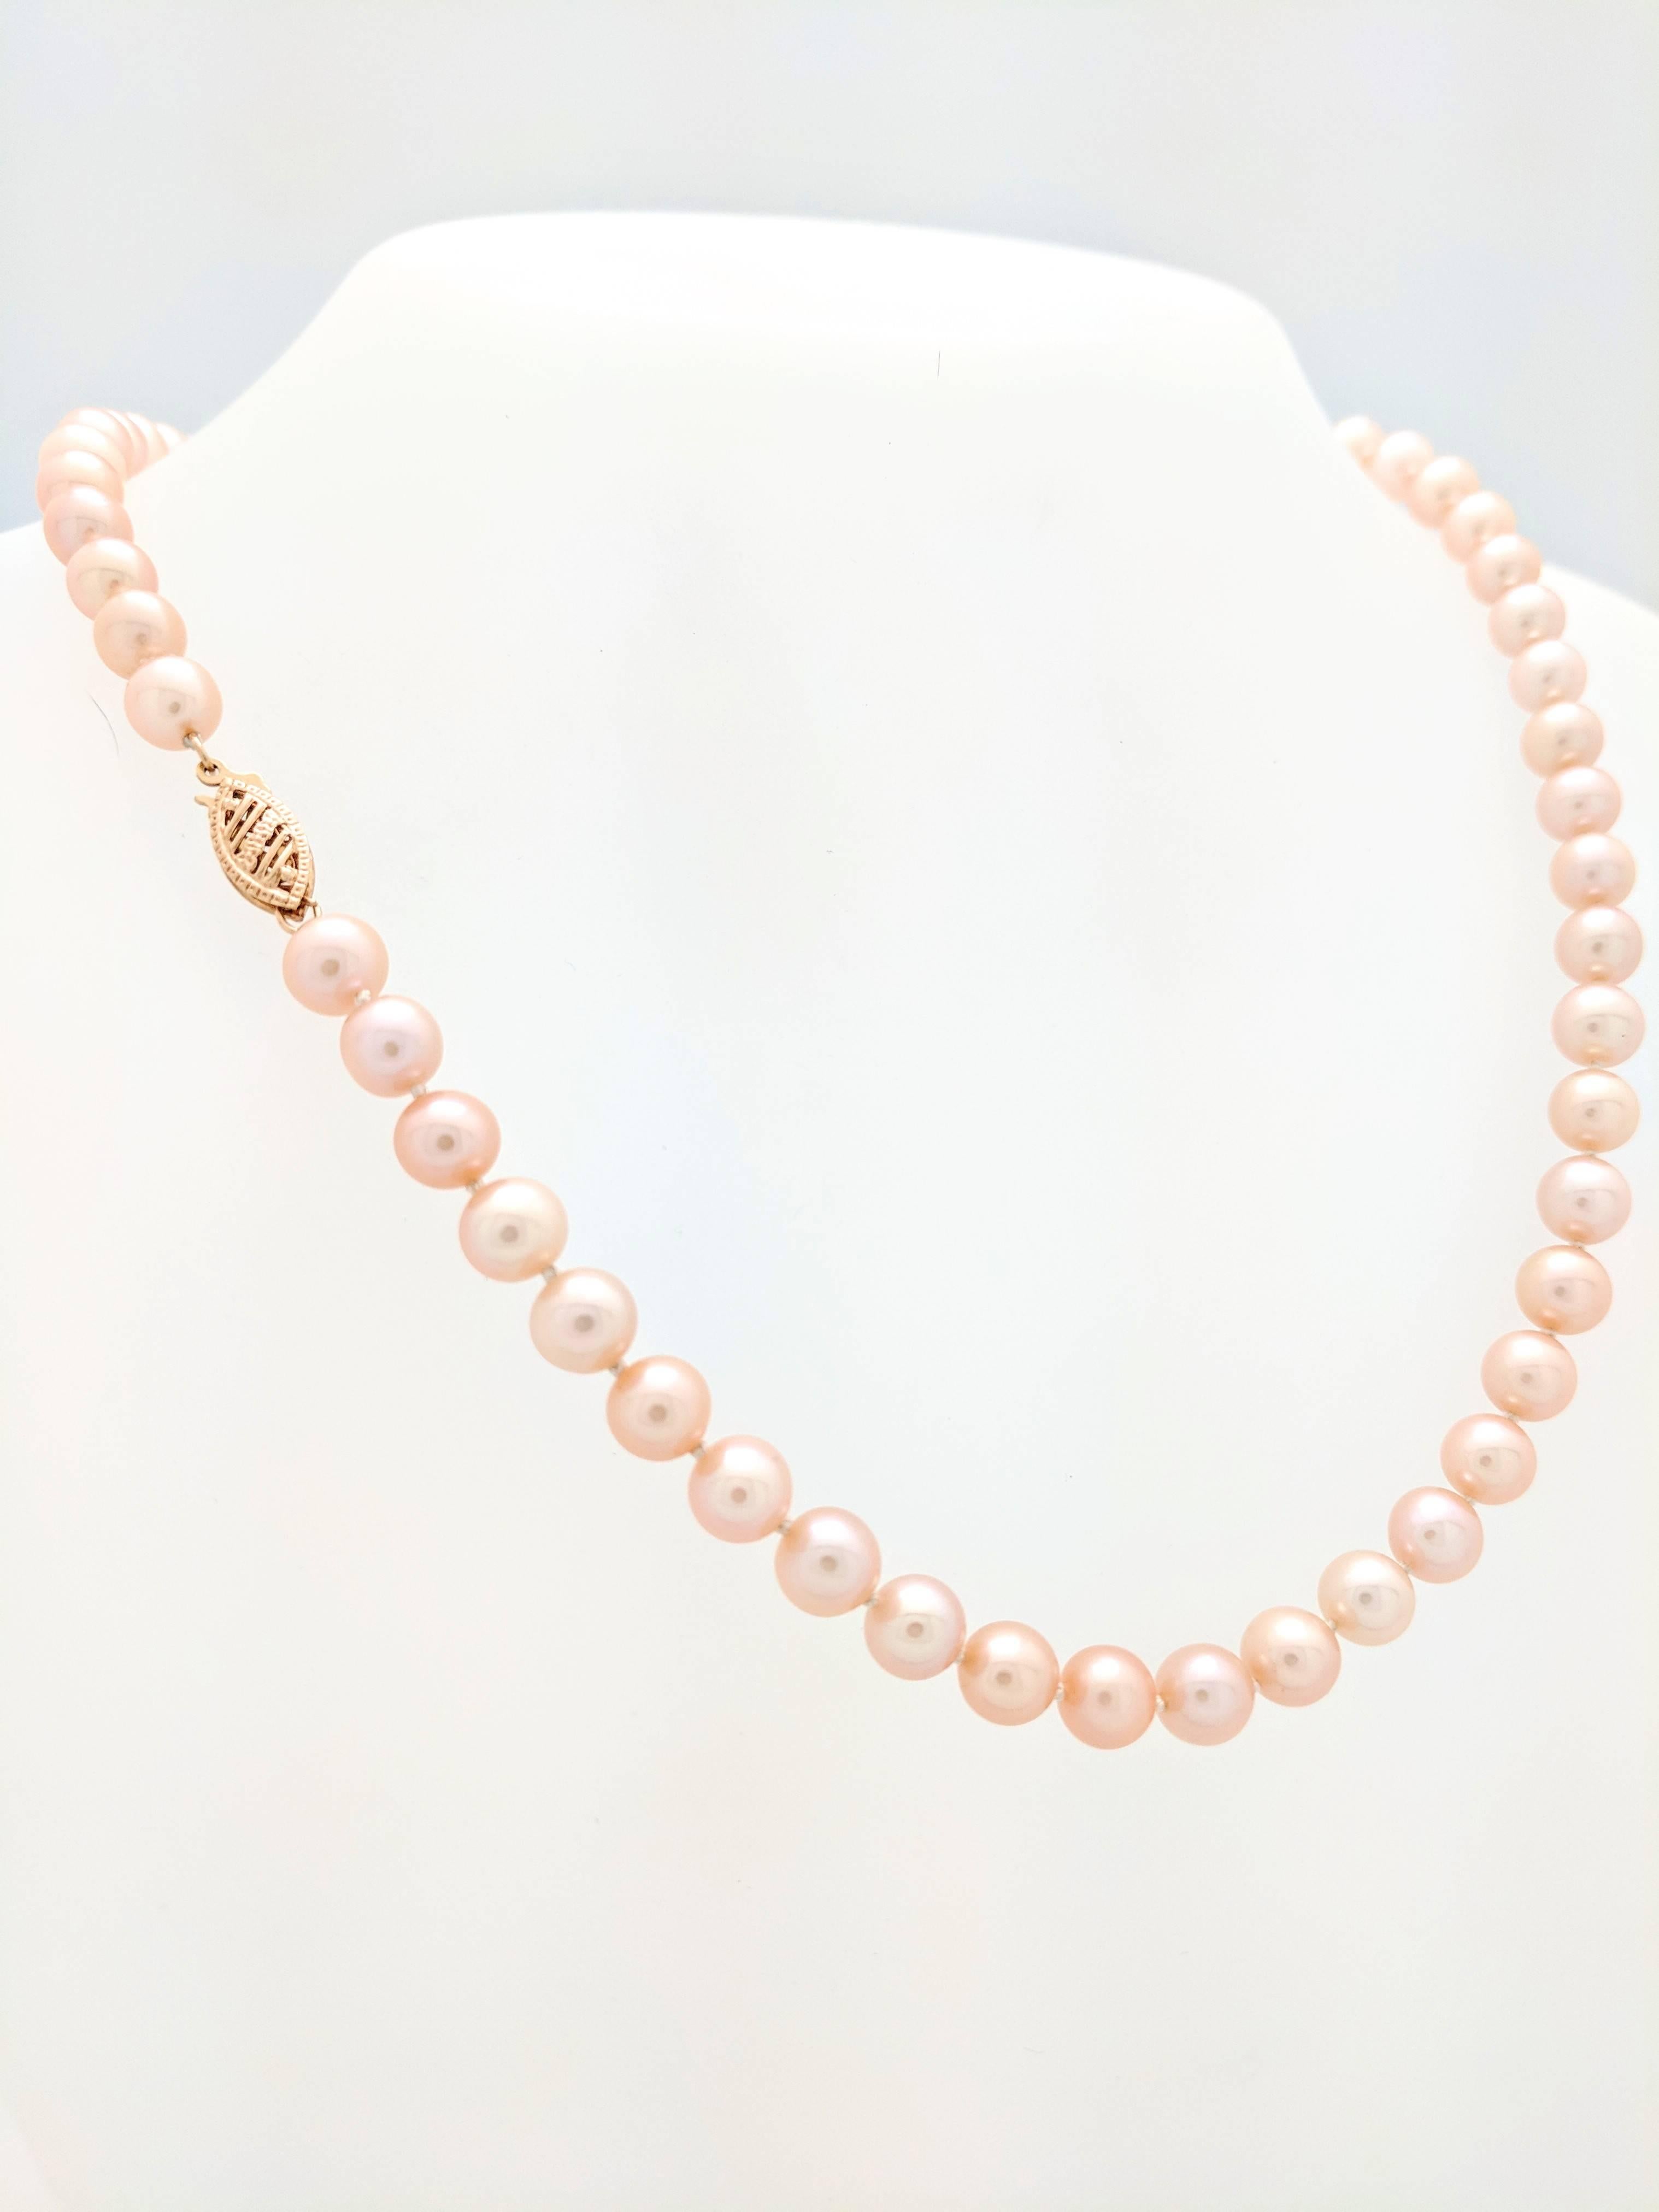 pink pearl necklaces